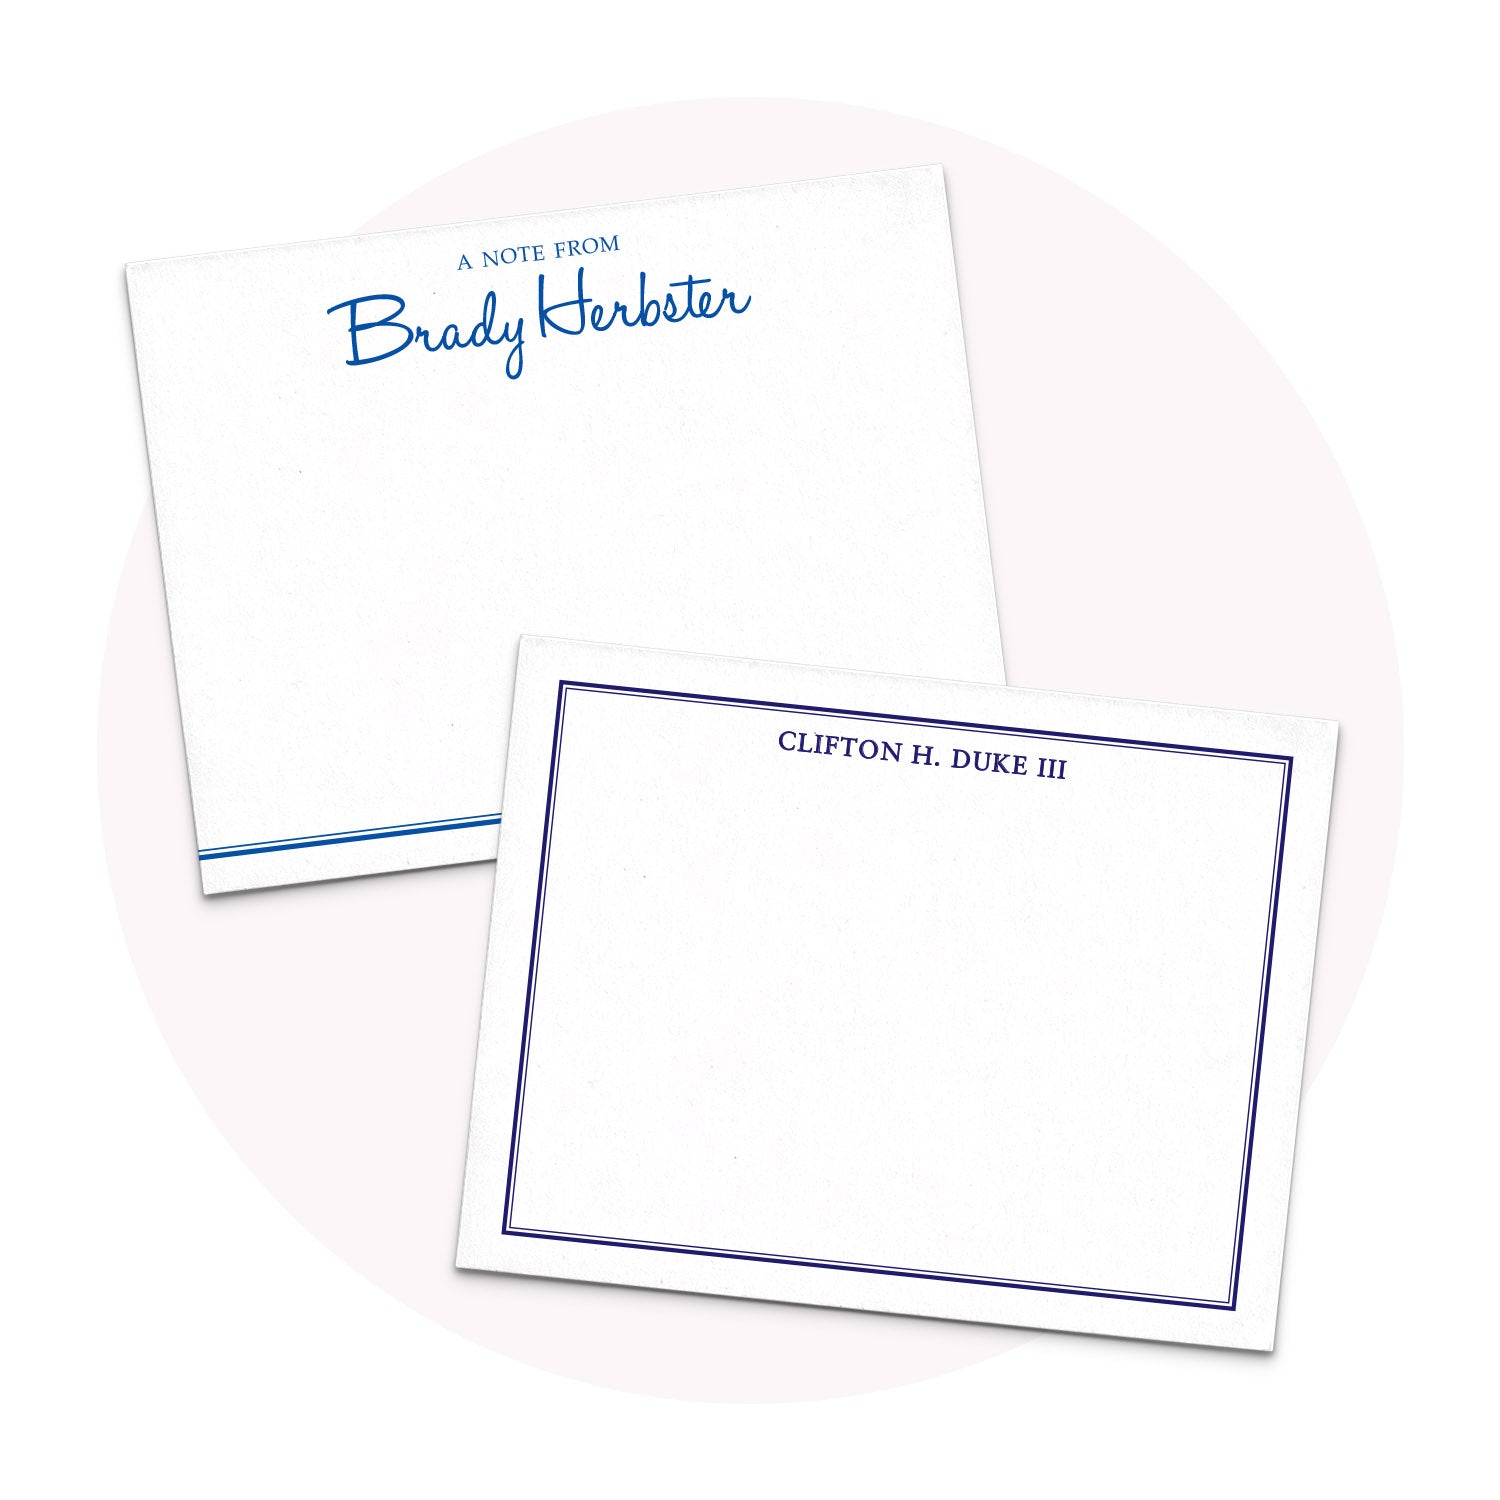 Thank You Cards for Business